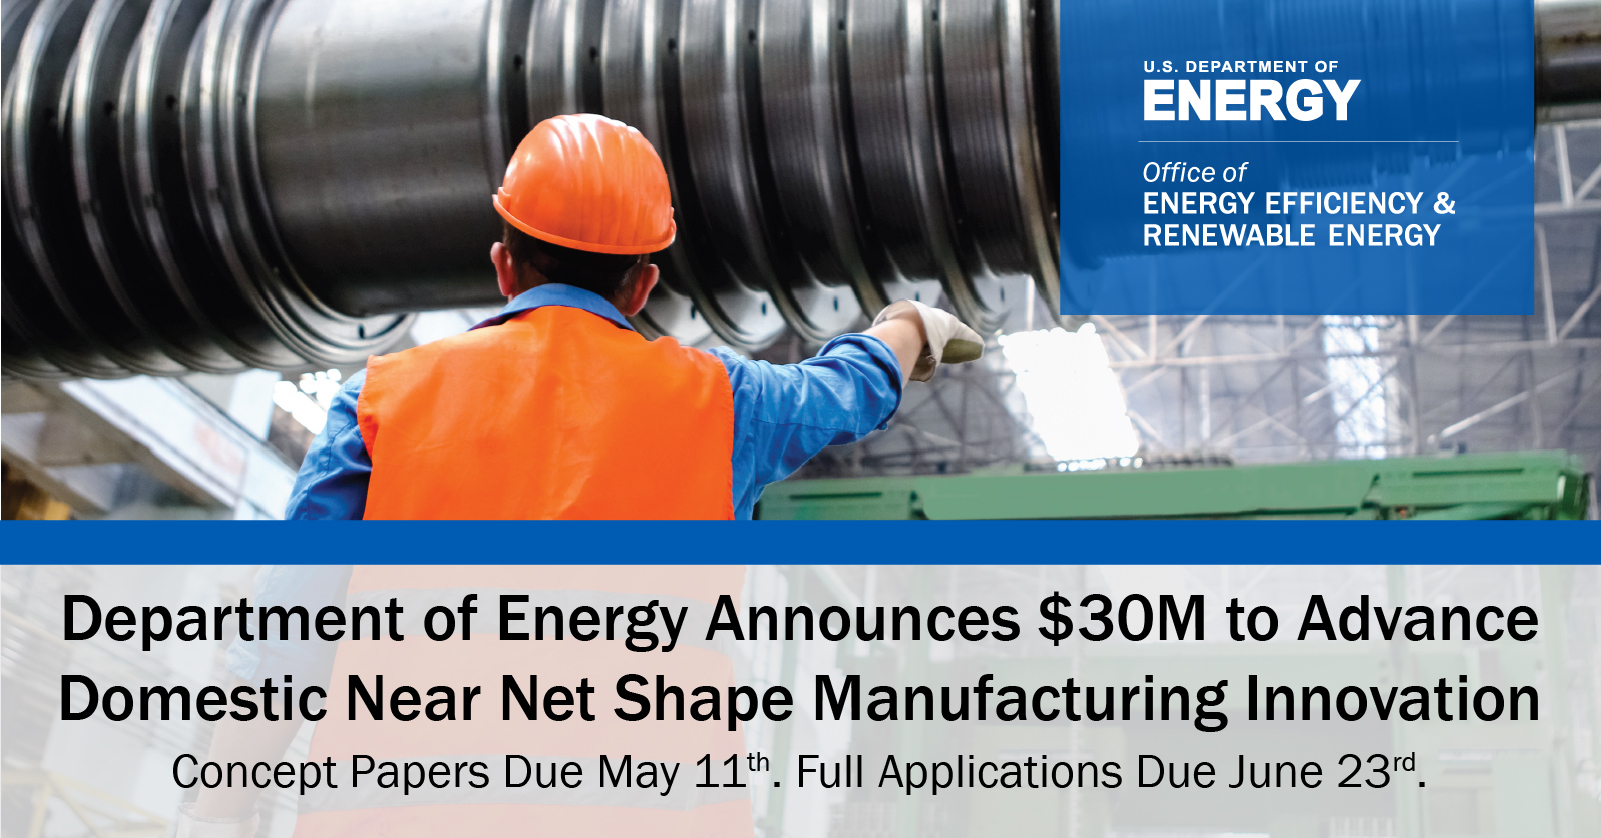 DOE announced 30M to advance domestic near net shape manufacturing innovation